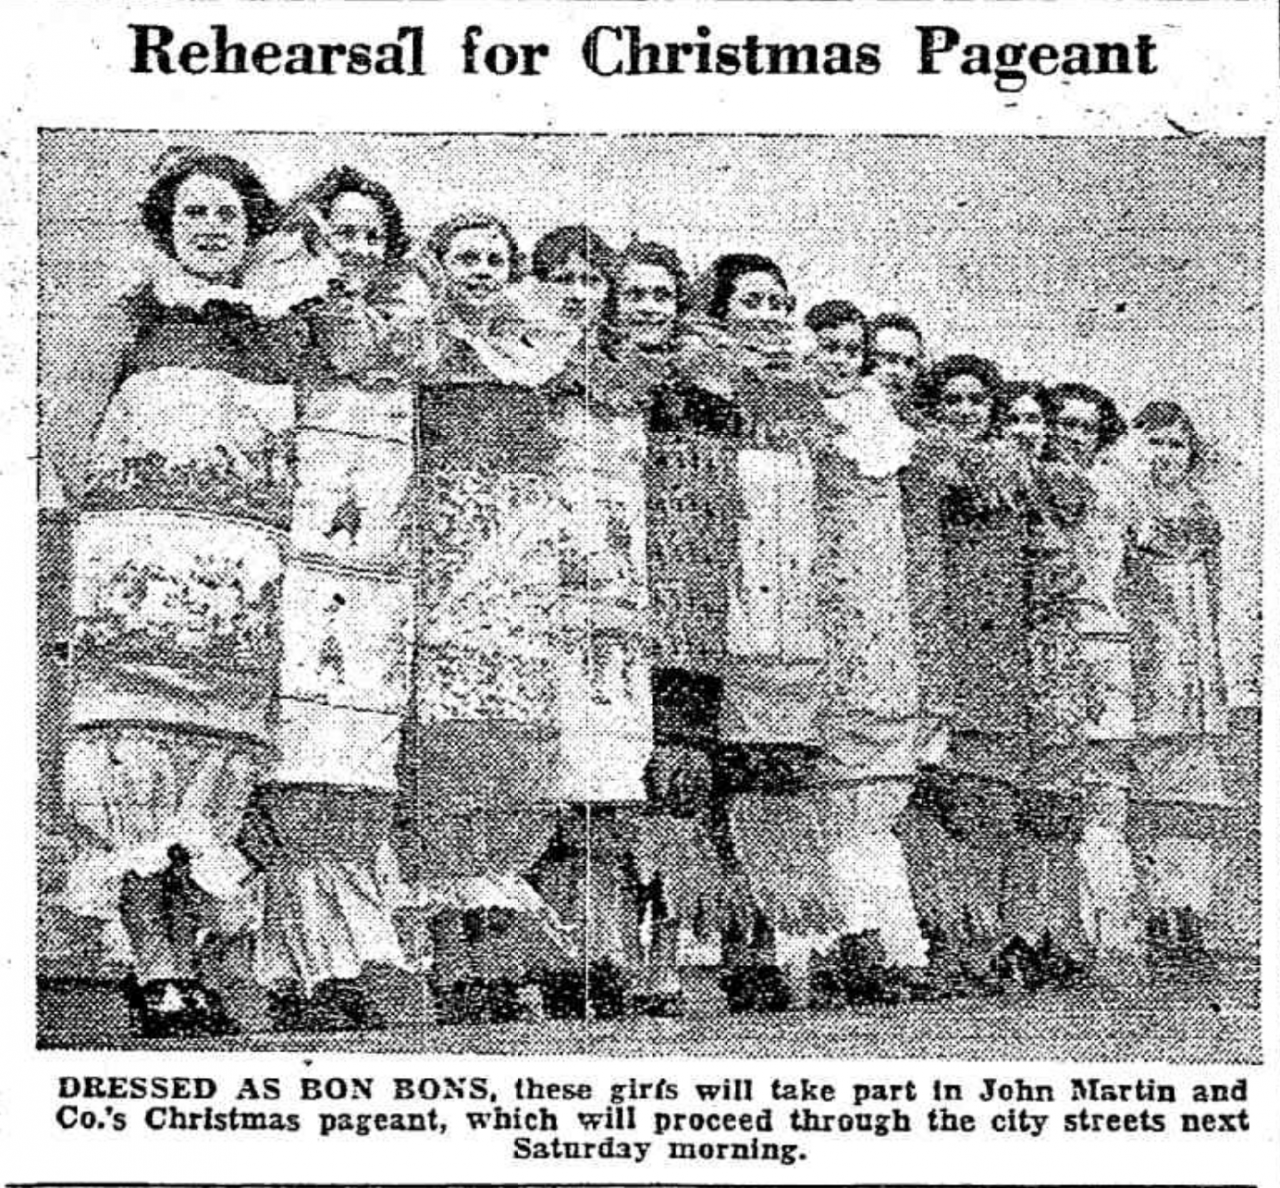 1934 'Rehearsal for Christmas Pageant', News. A newspaper clipping.